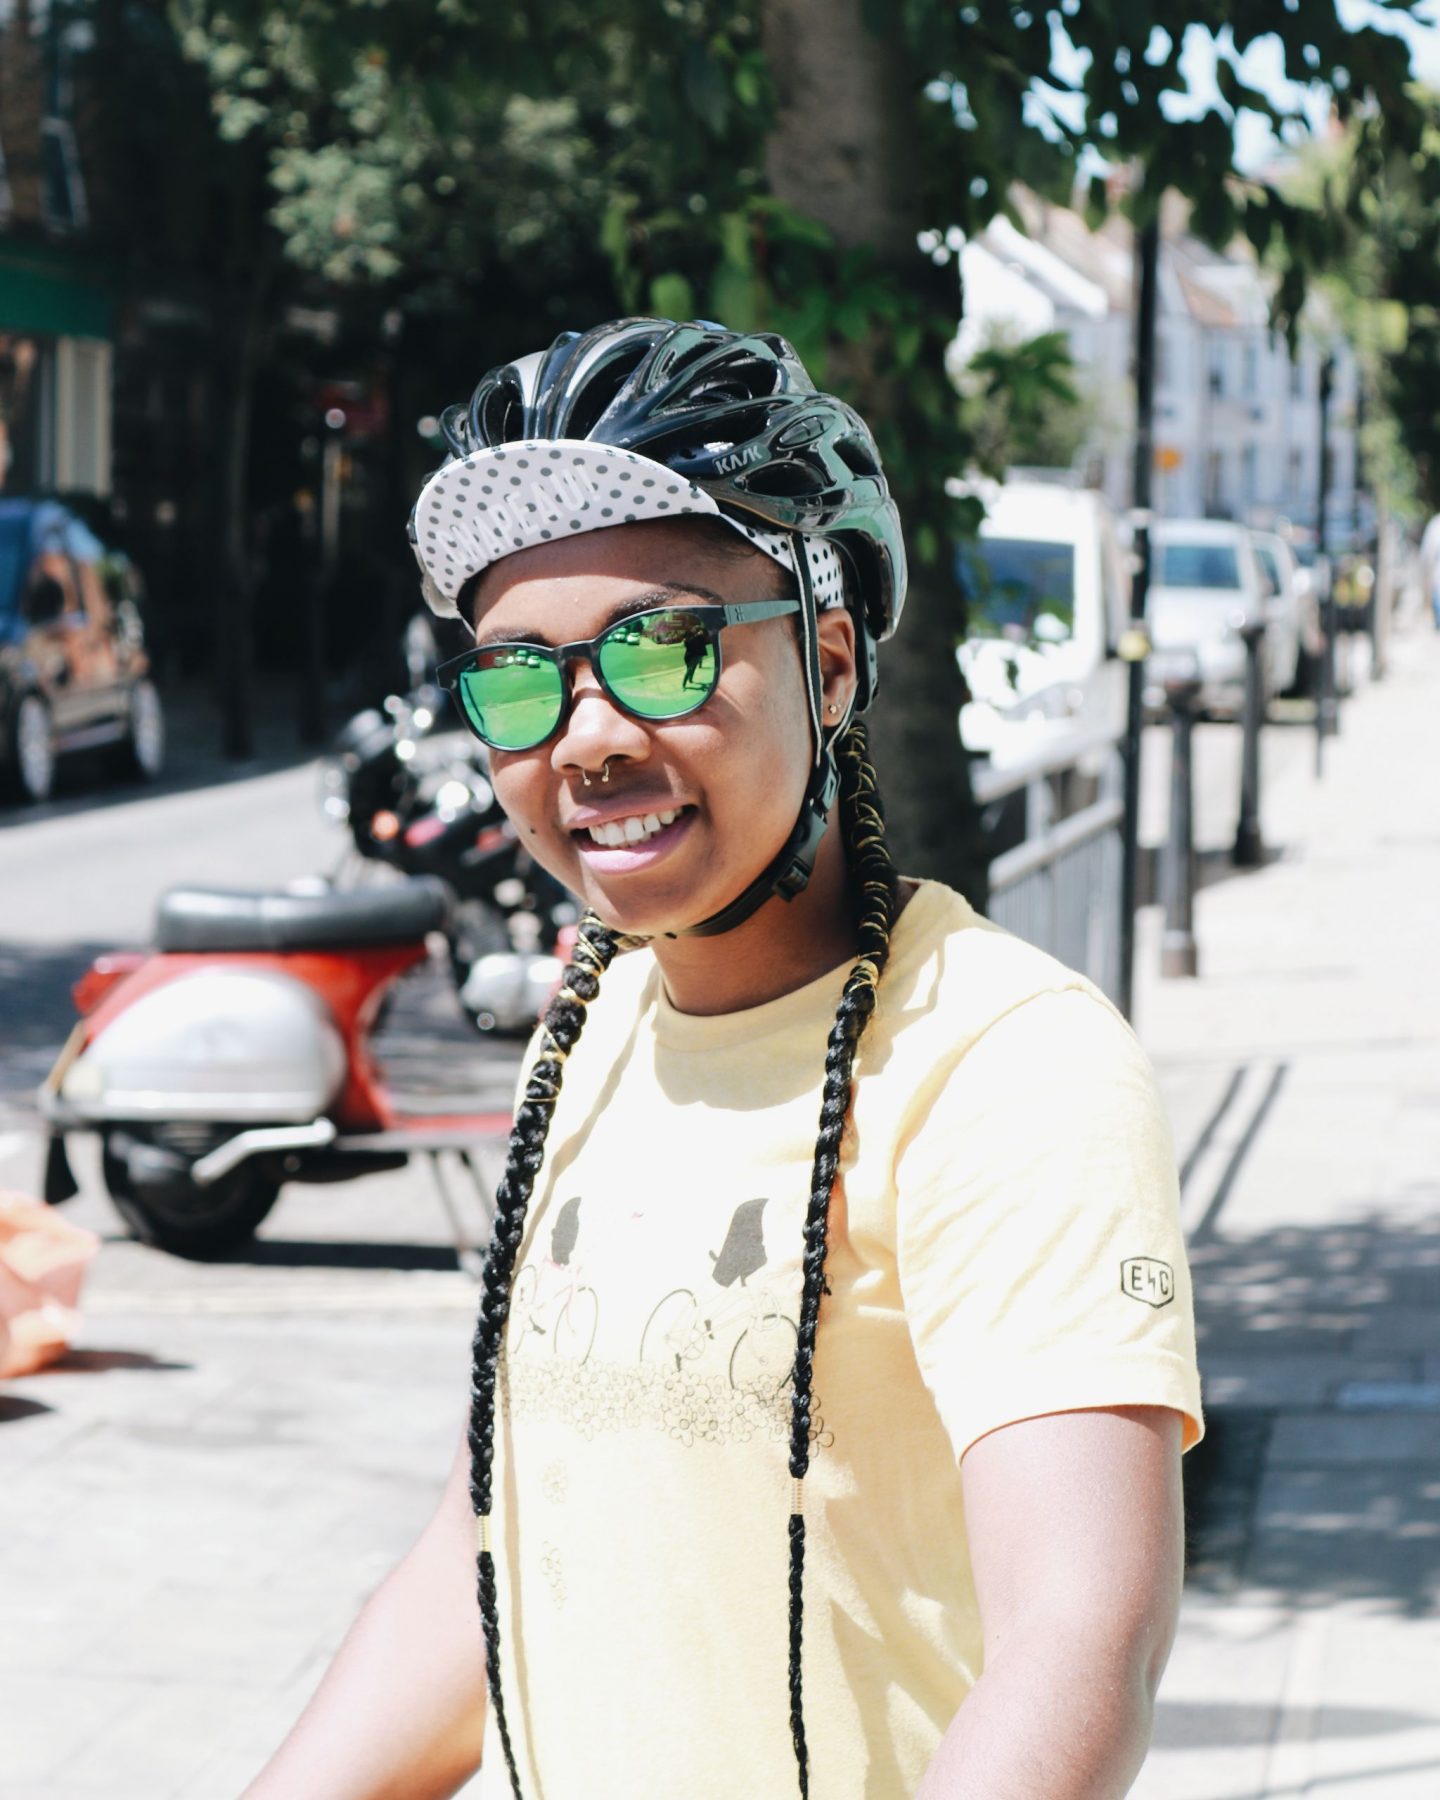 Styling Natural Afro Hair For Cycling (and Helmets) - keep it simpElle